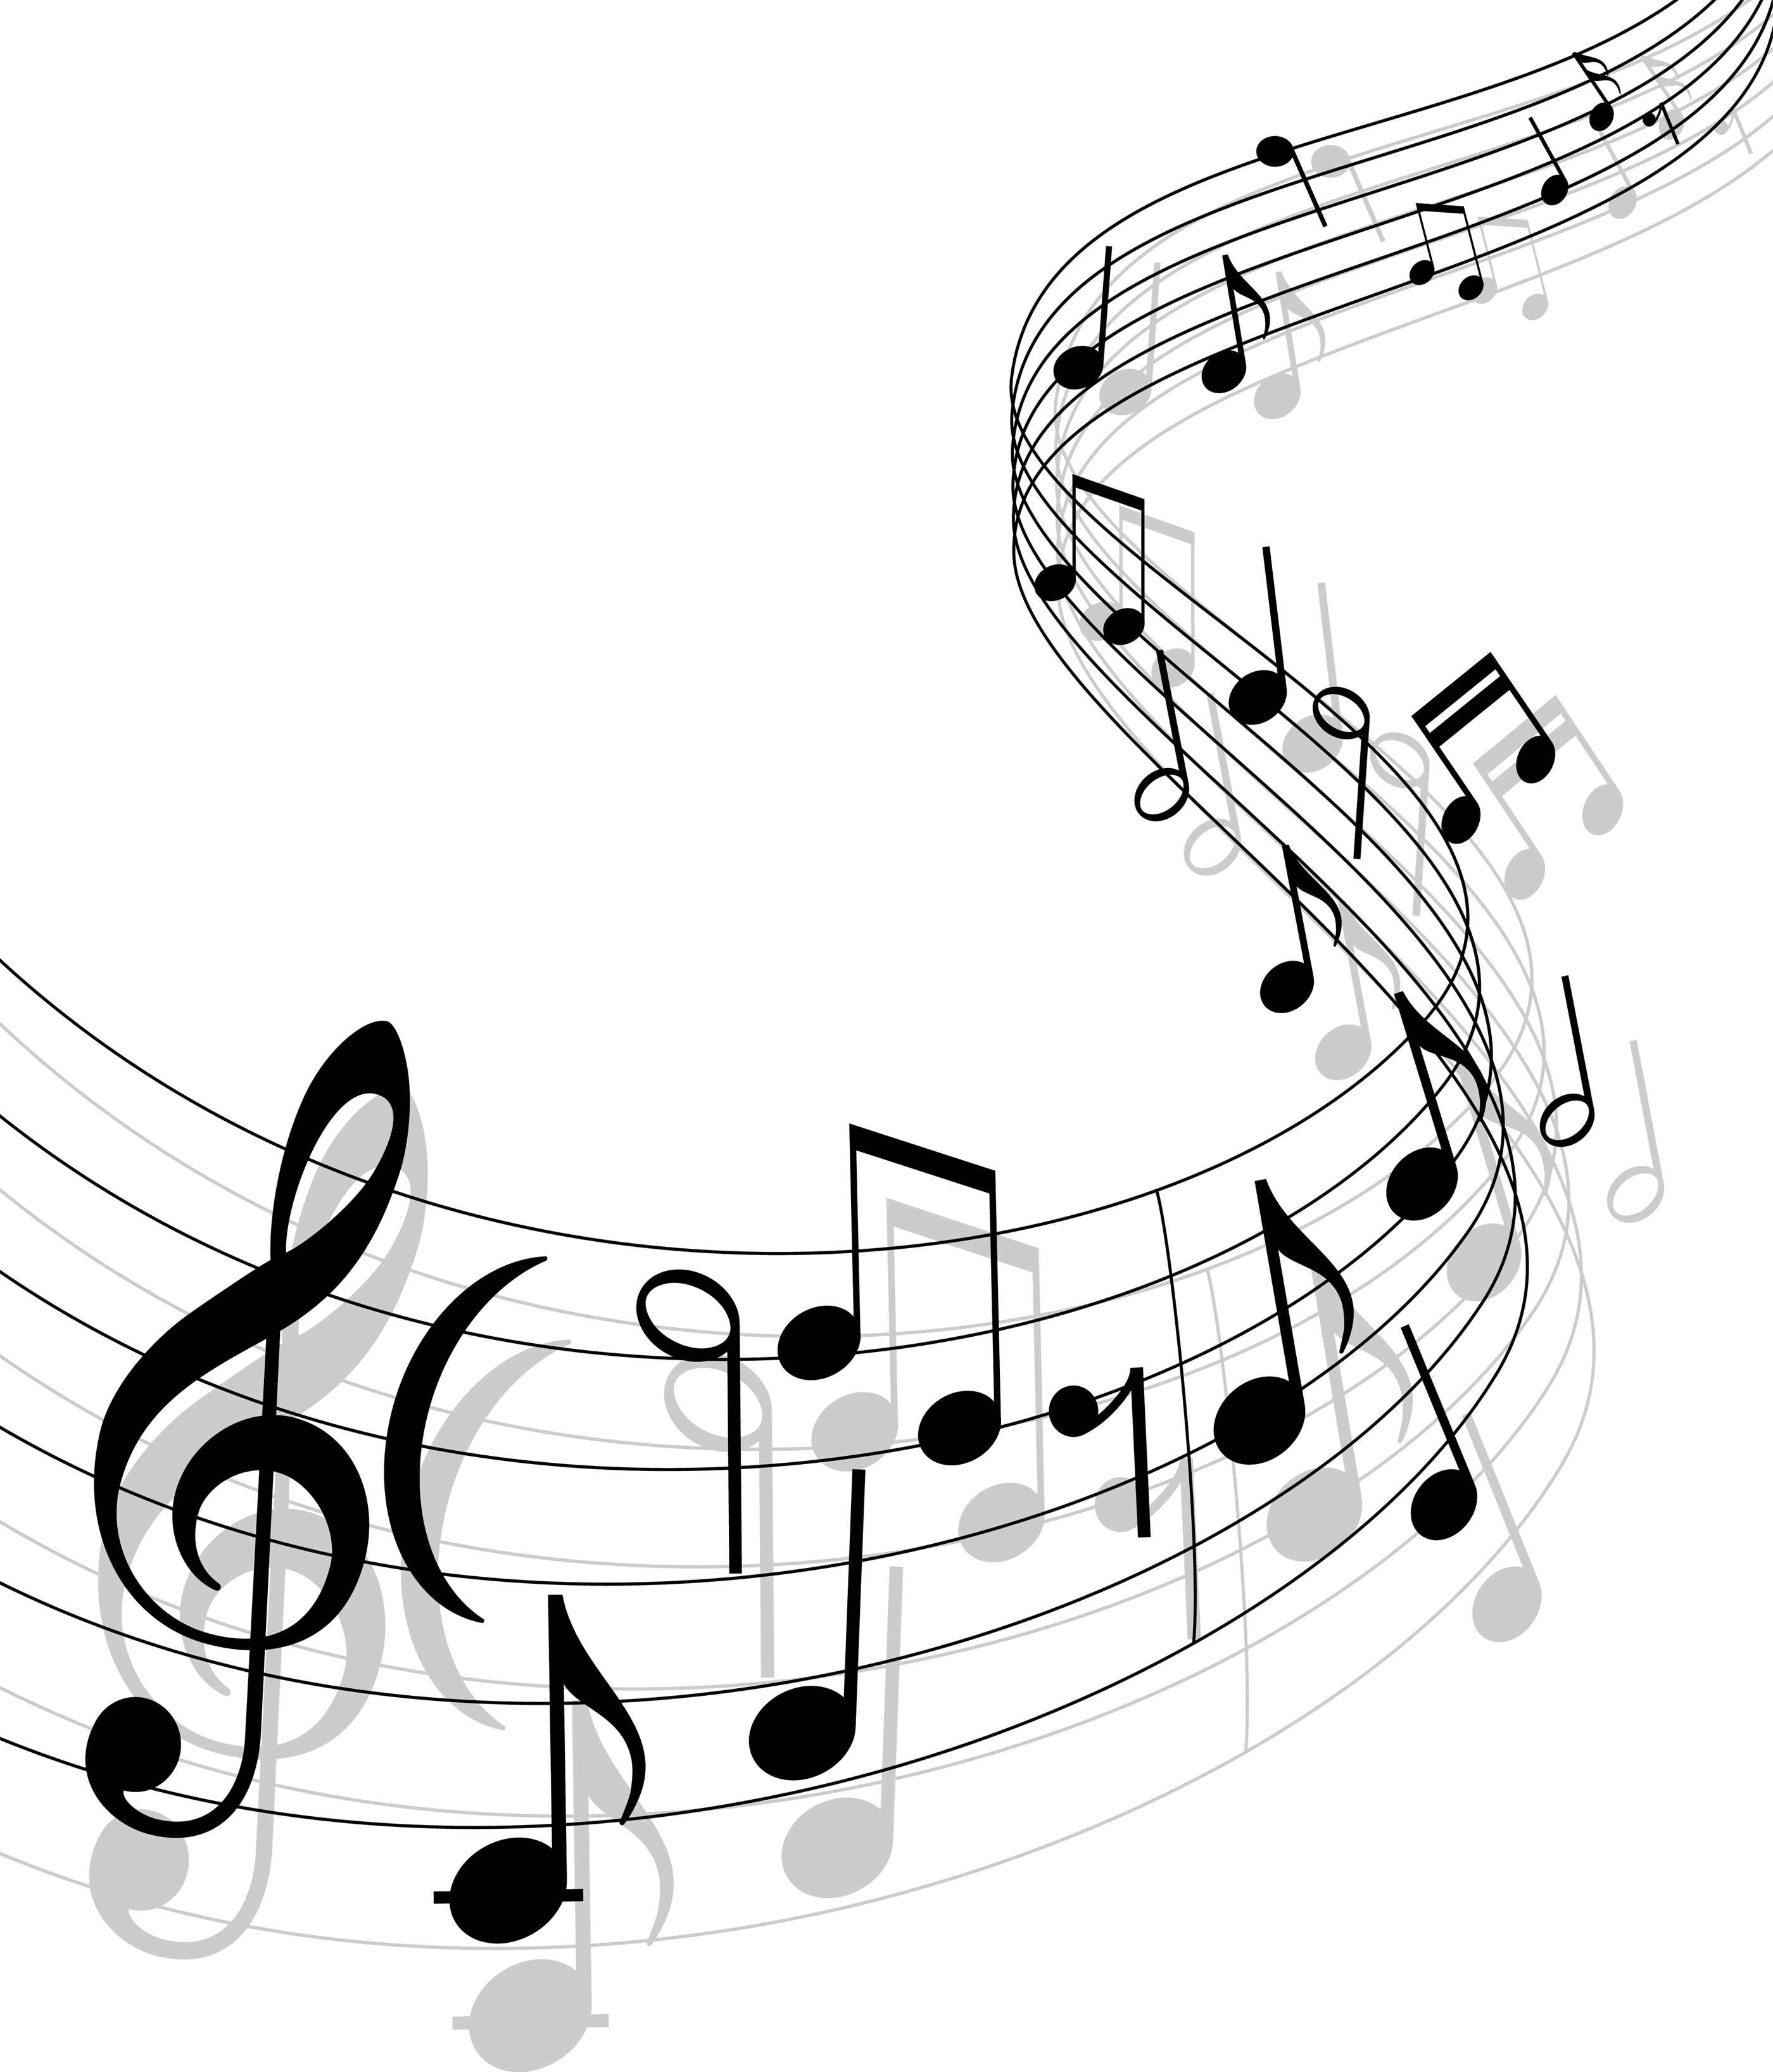 free black and white music clipart - photo #18